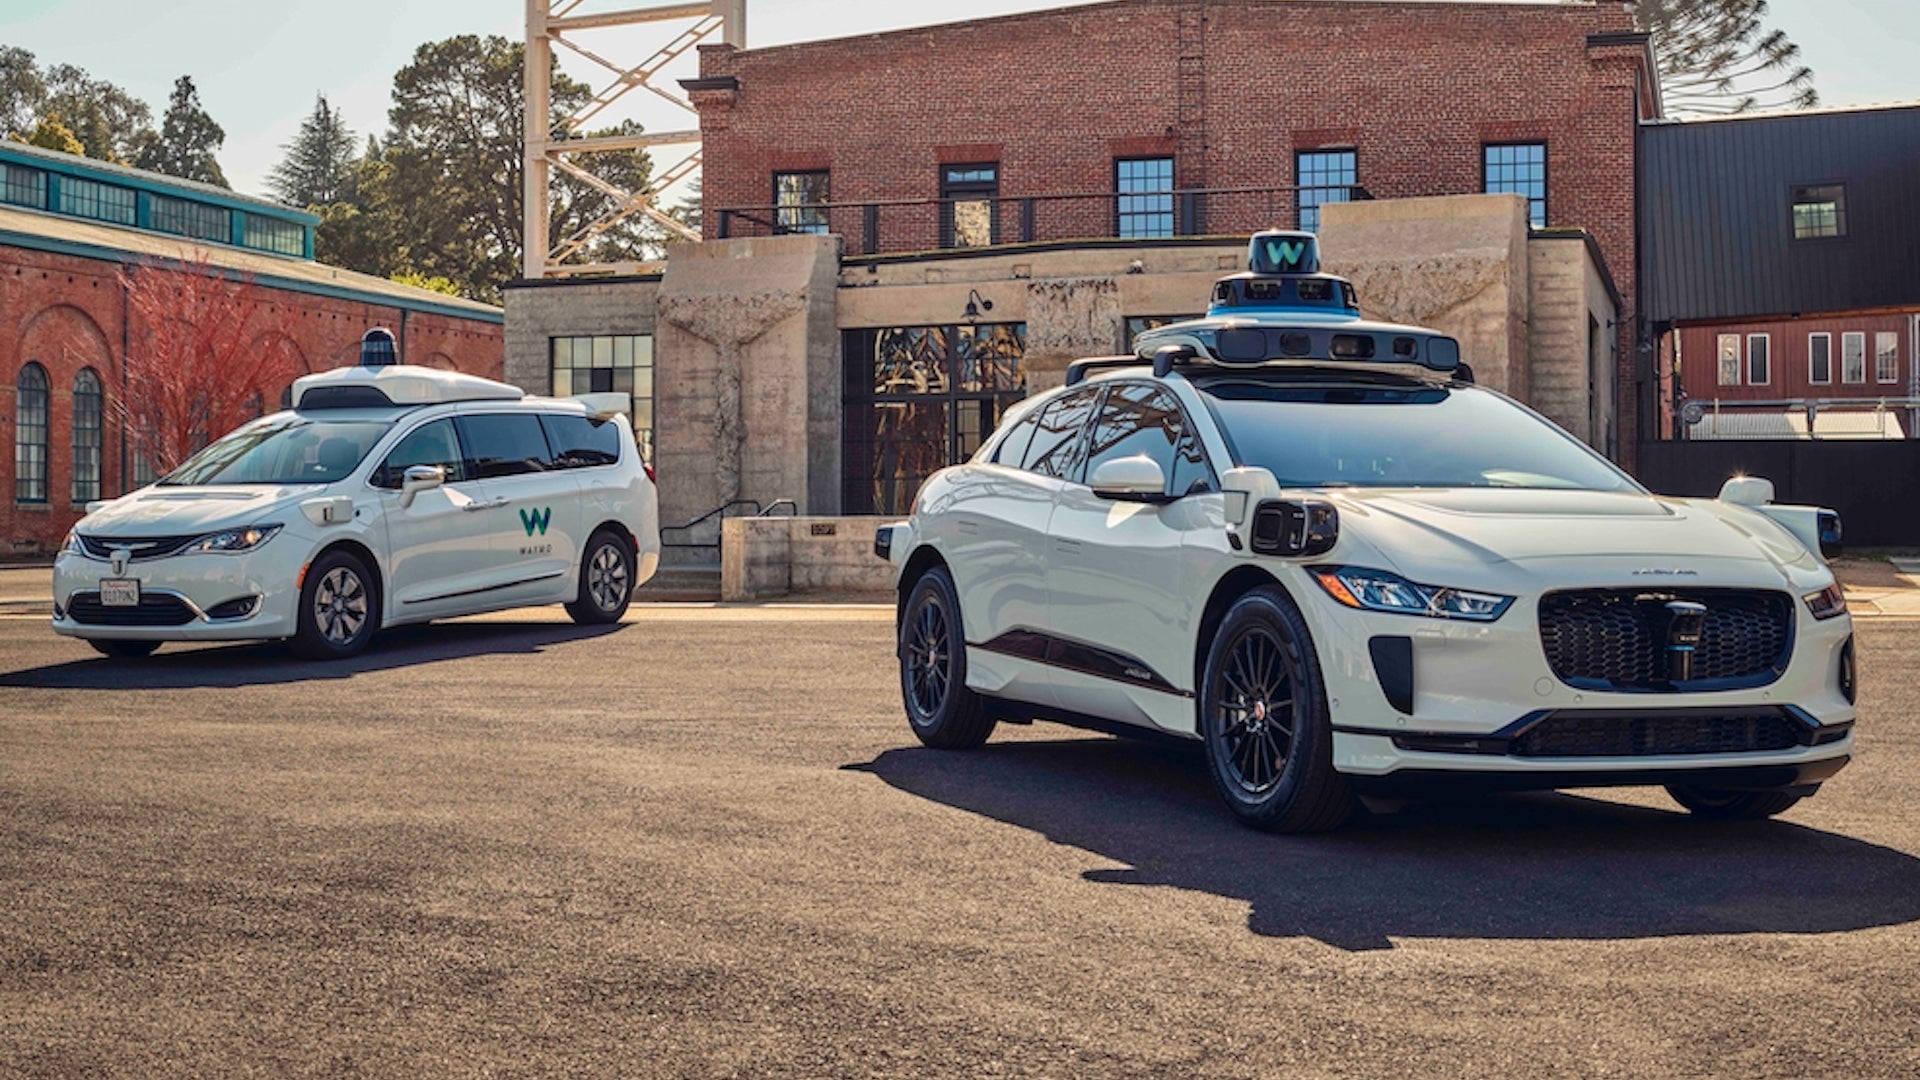 Waymo autonomous vehicle recalled after two separate collisions with the same truck in a matter of minutes.